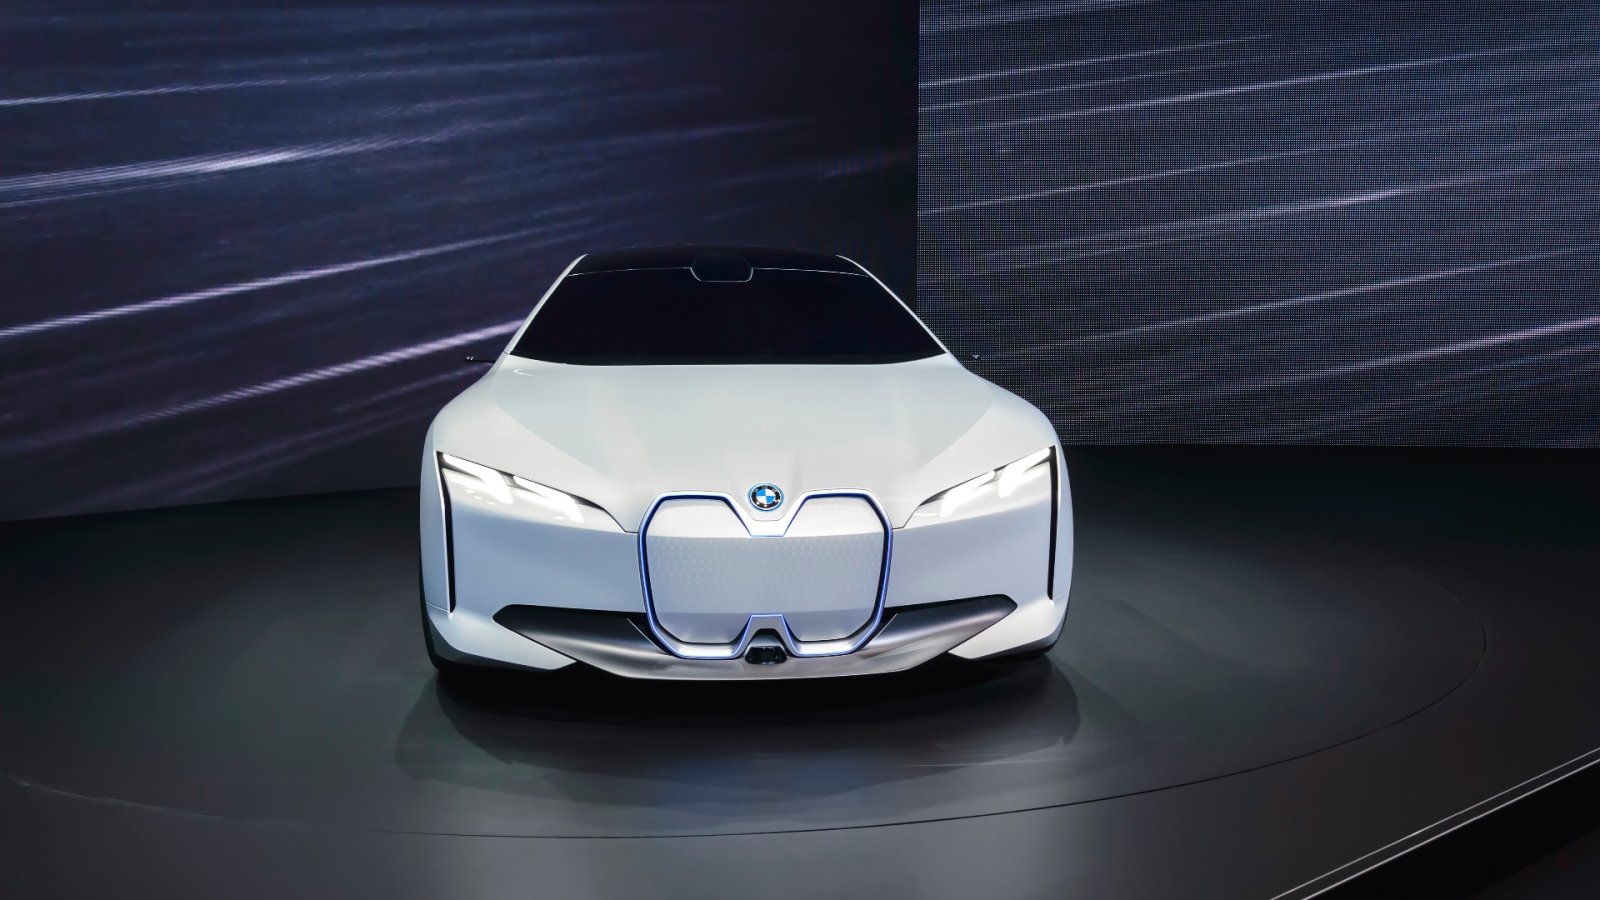 Meet the car of the future, changing 32 colors in seconds: BMW i Vision